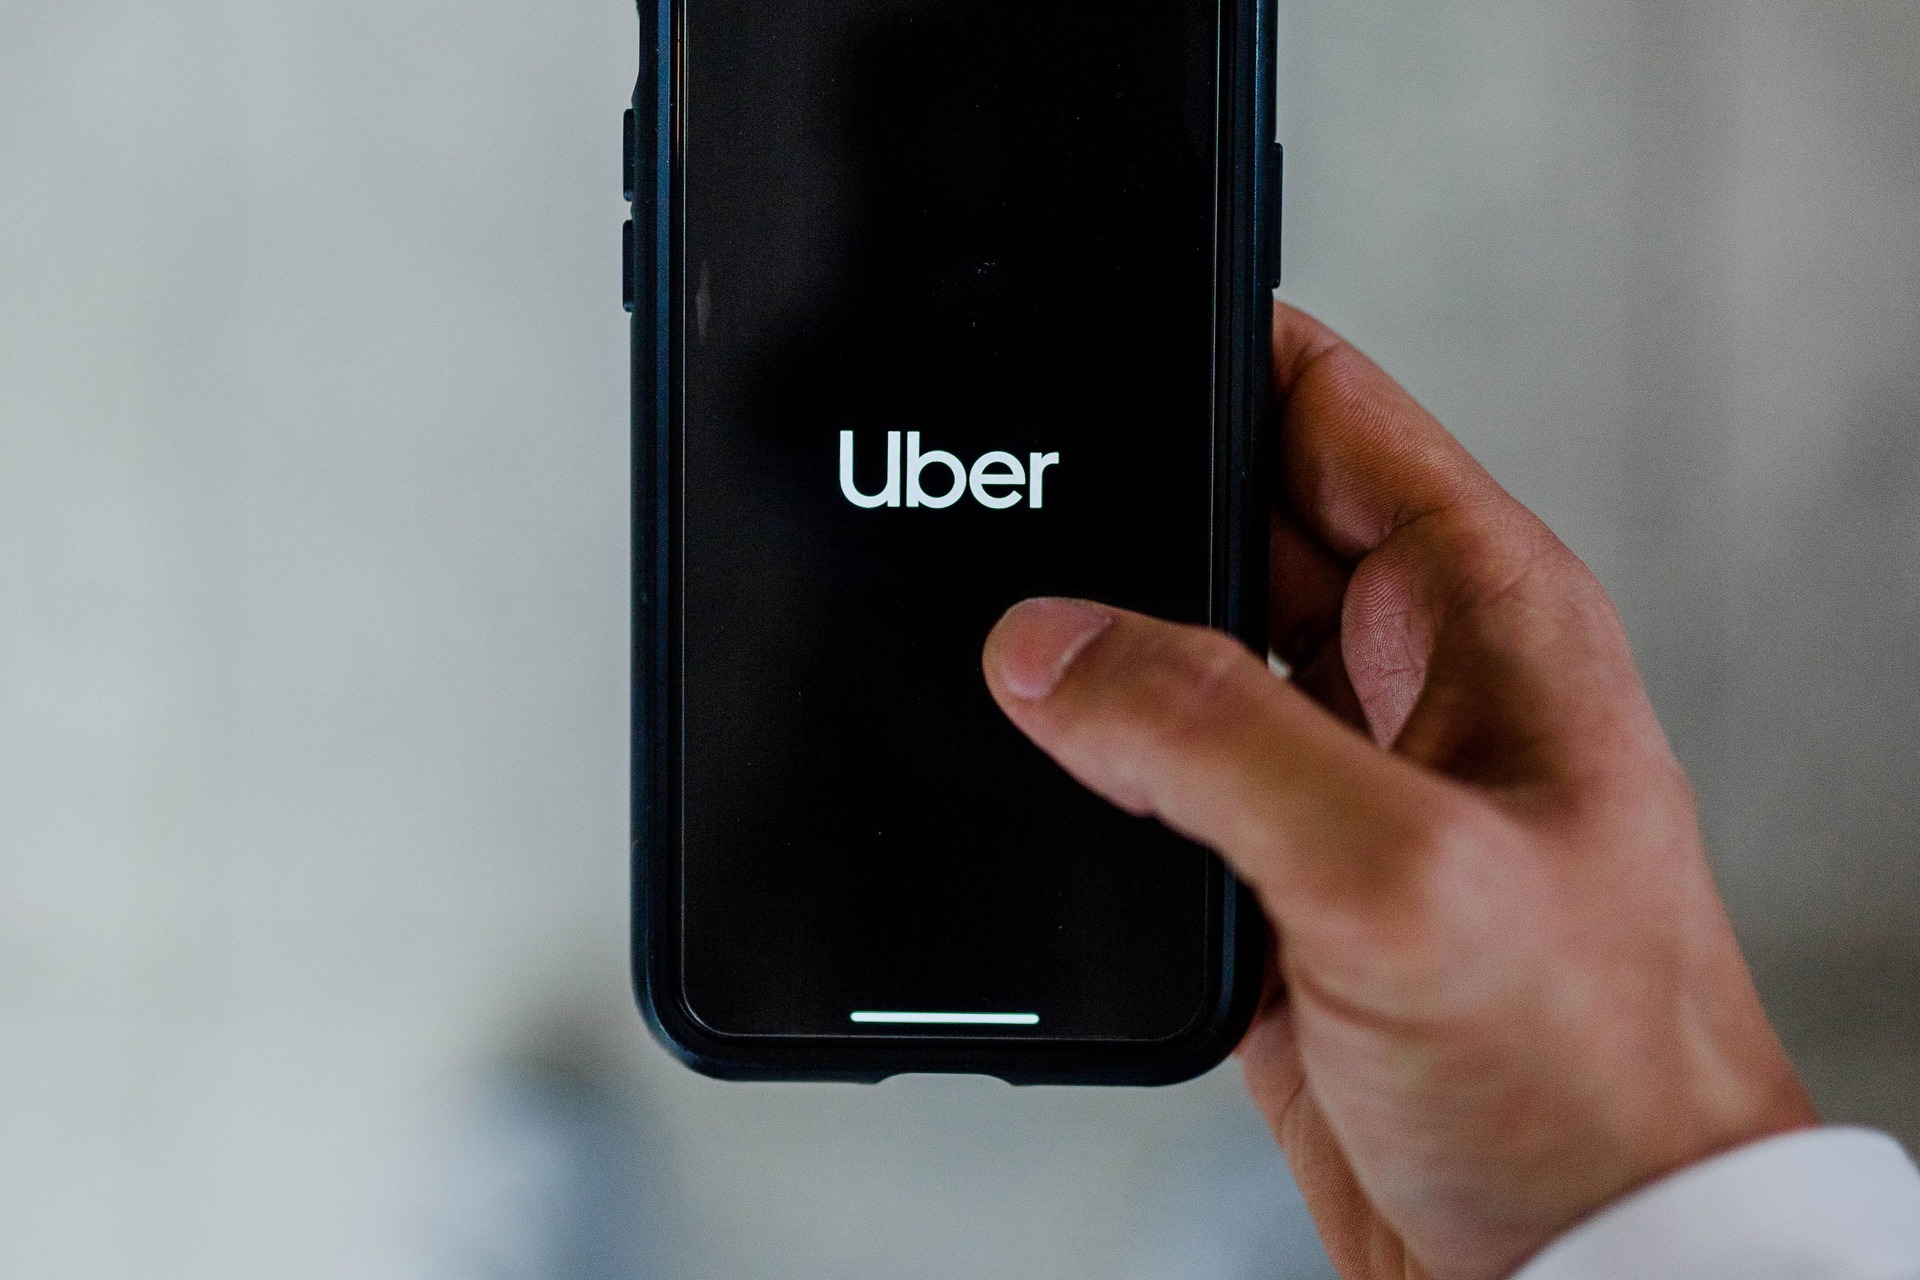 a phone featuring the Uber logo